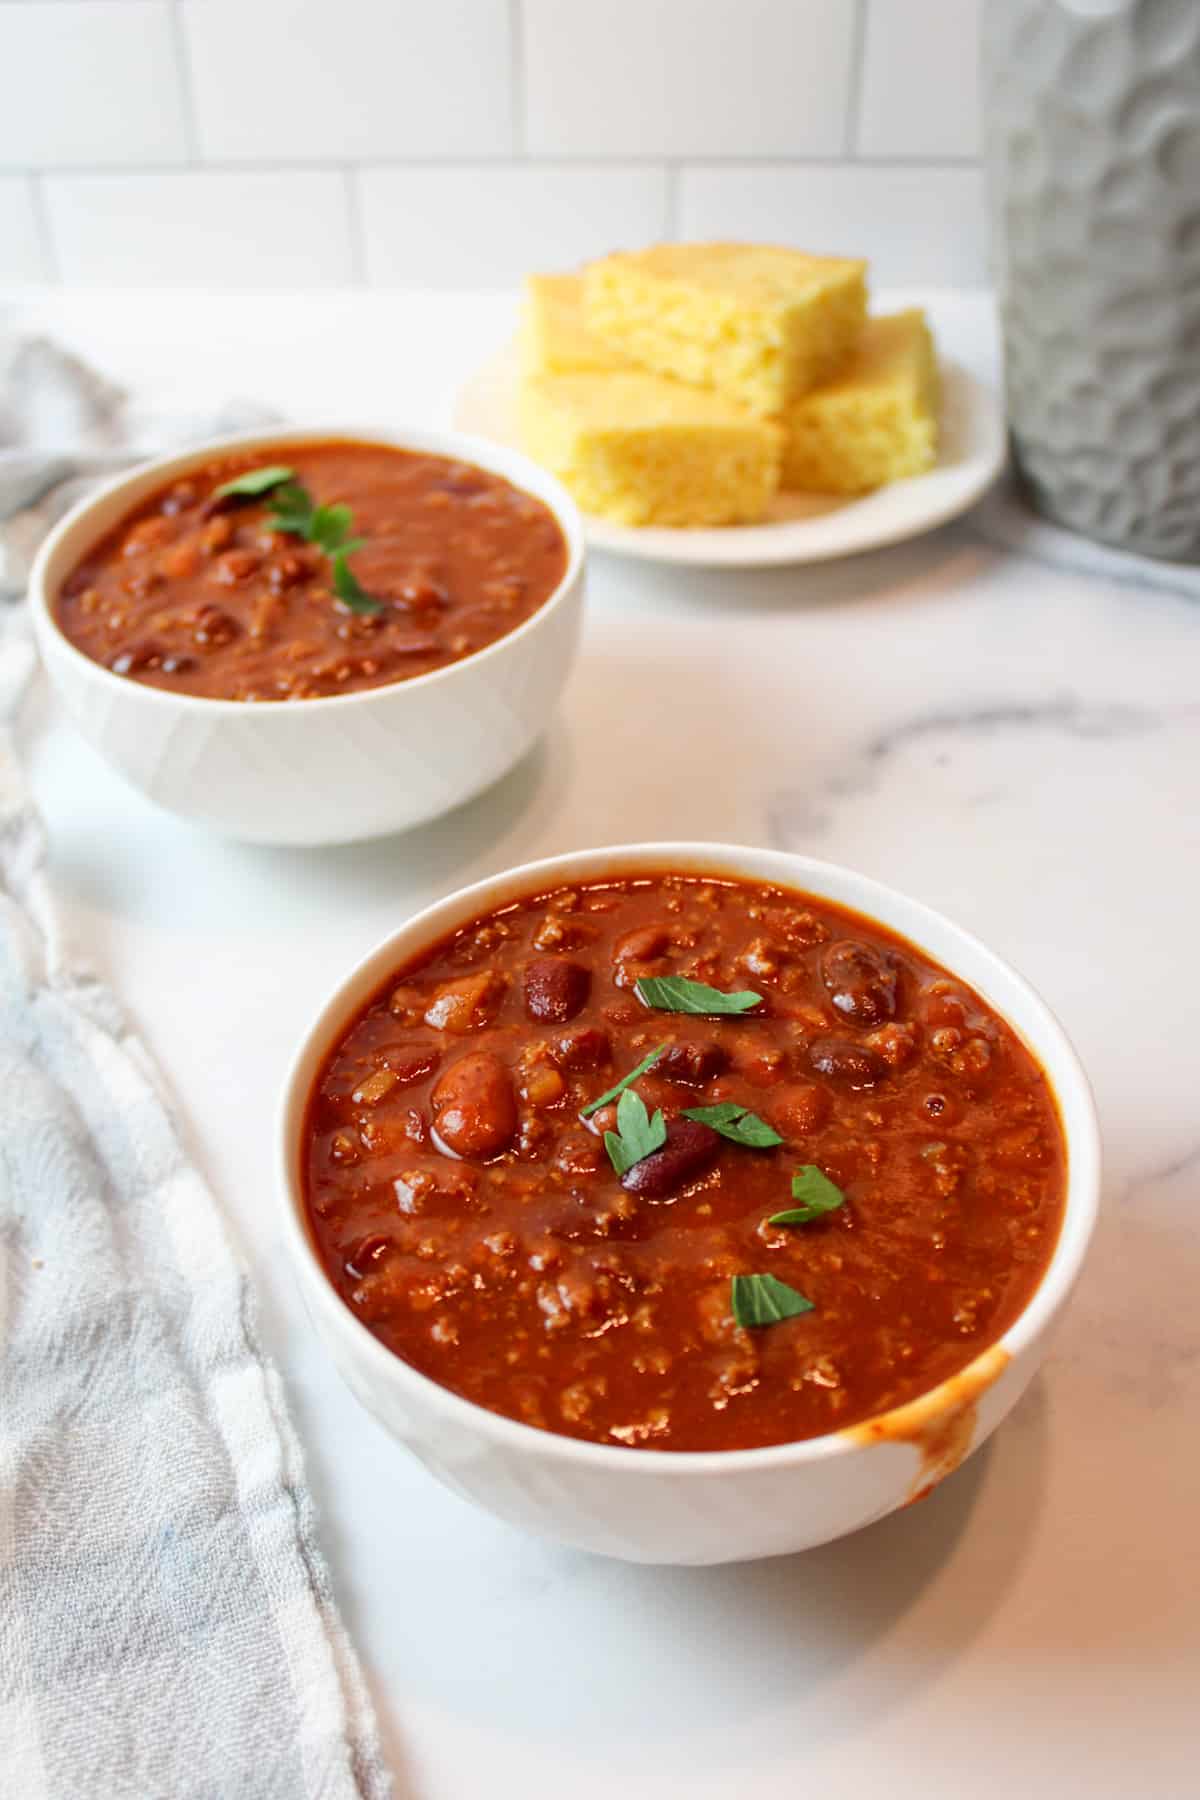 two bowls of tomato soup chili with a plate of cornbread in the background